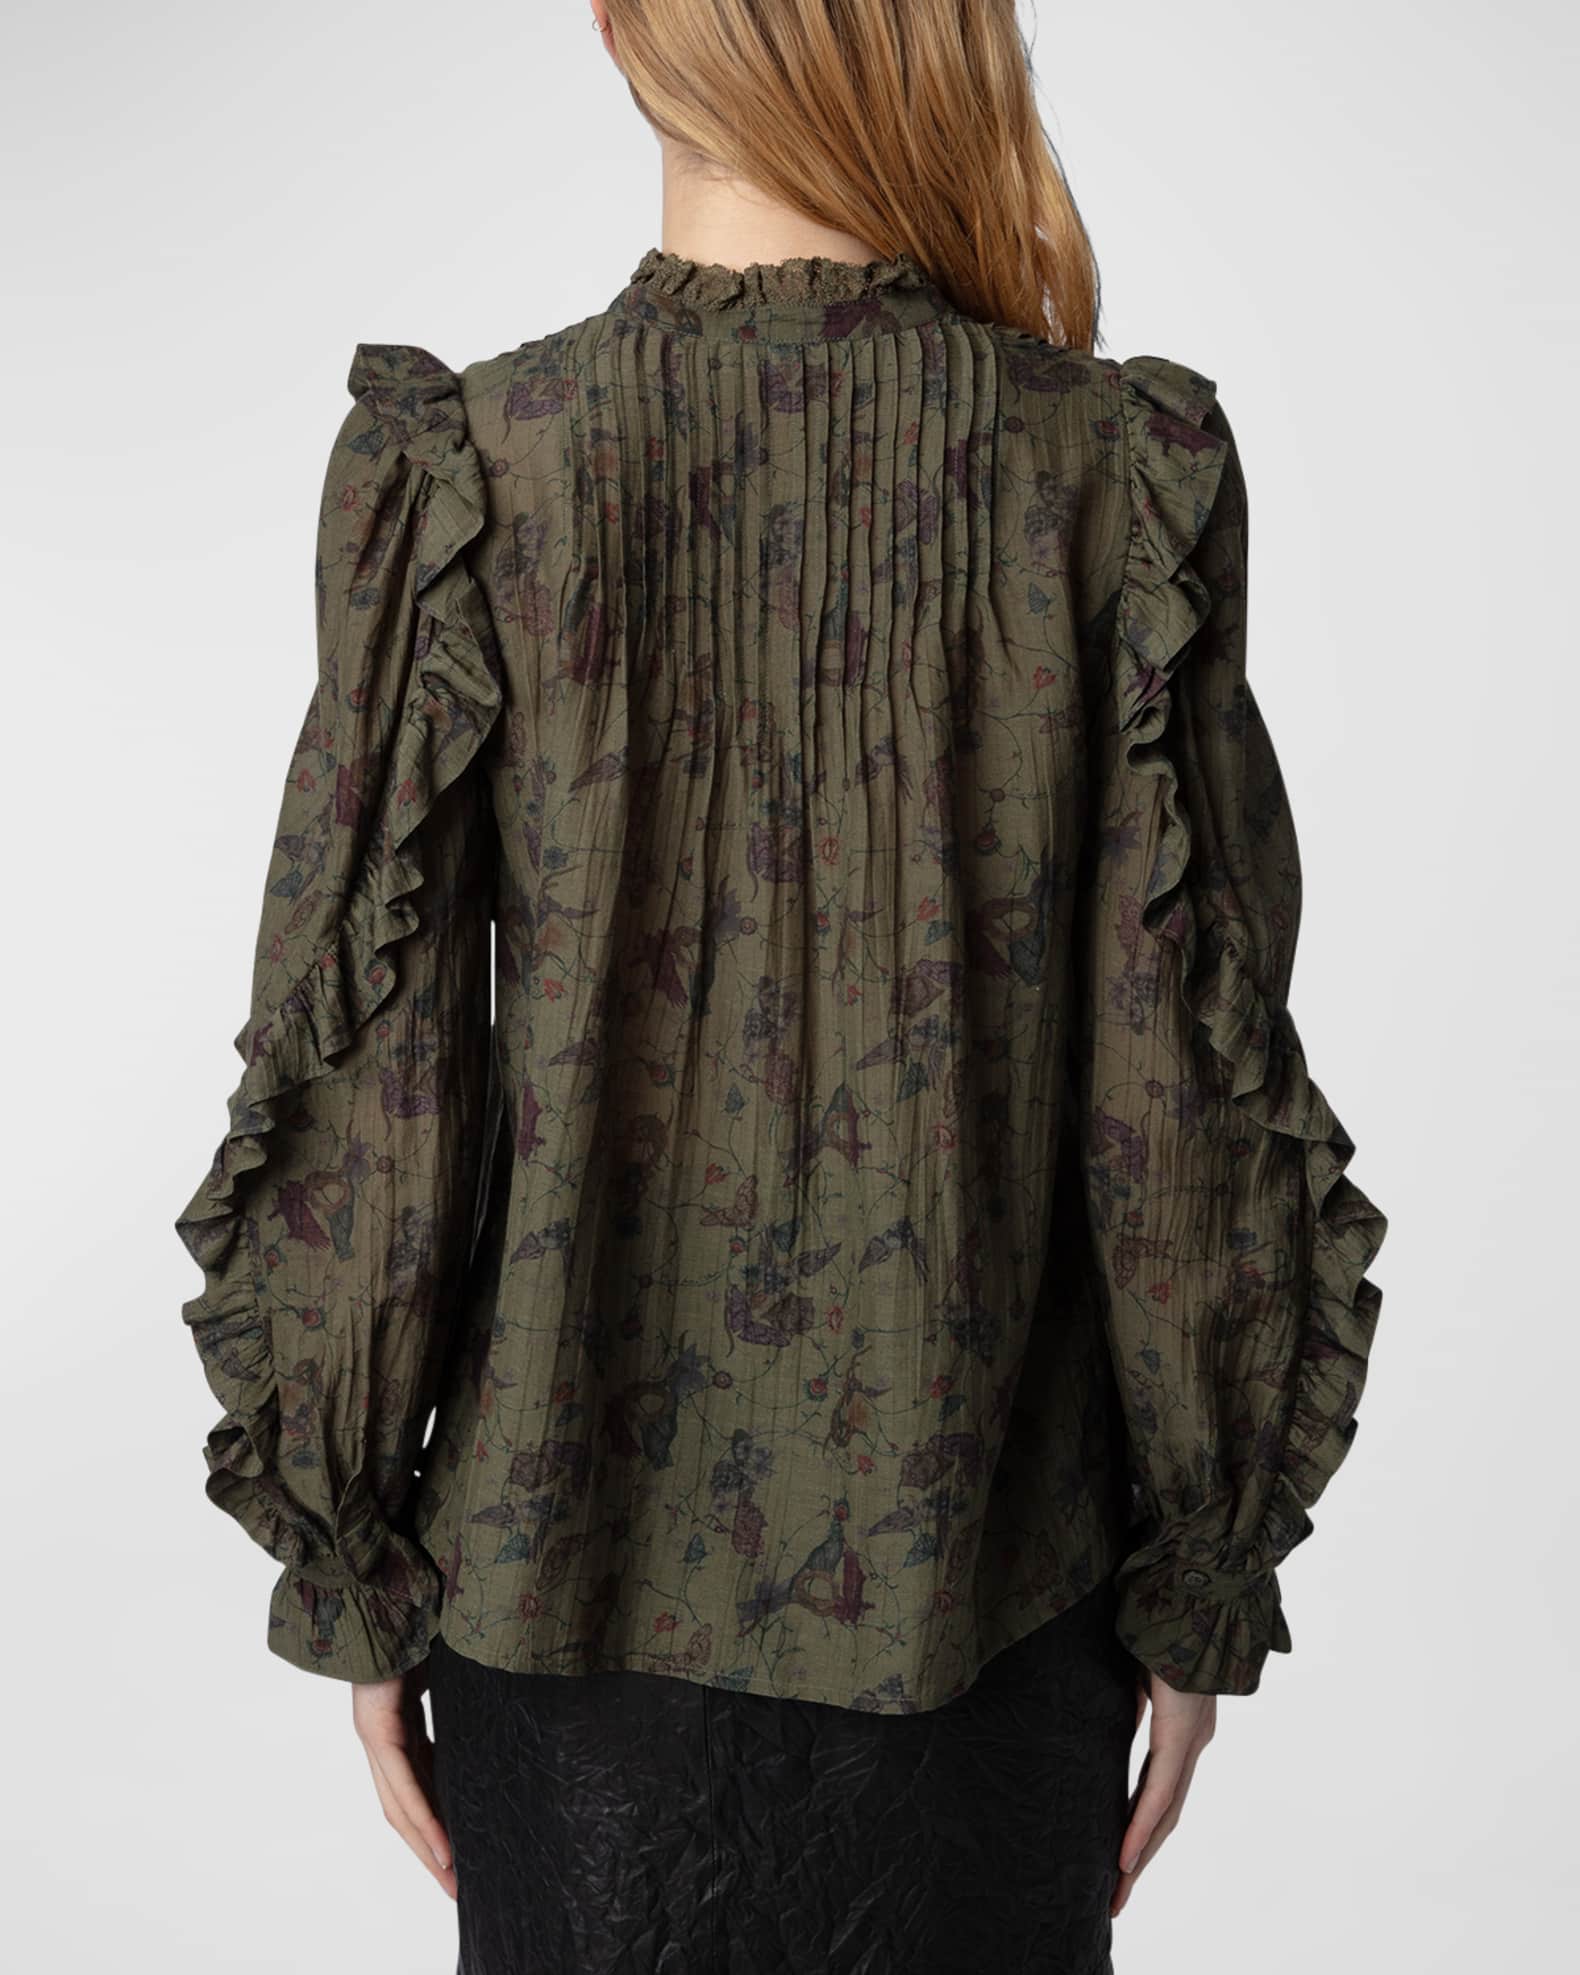 Zadig & Voltaire Timmy Tomboy Holly Blouse | Neiman Marcus